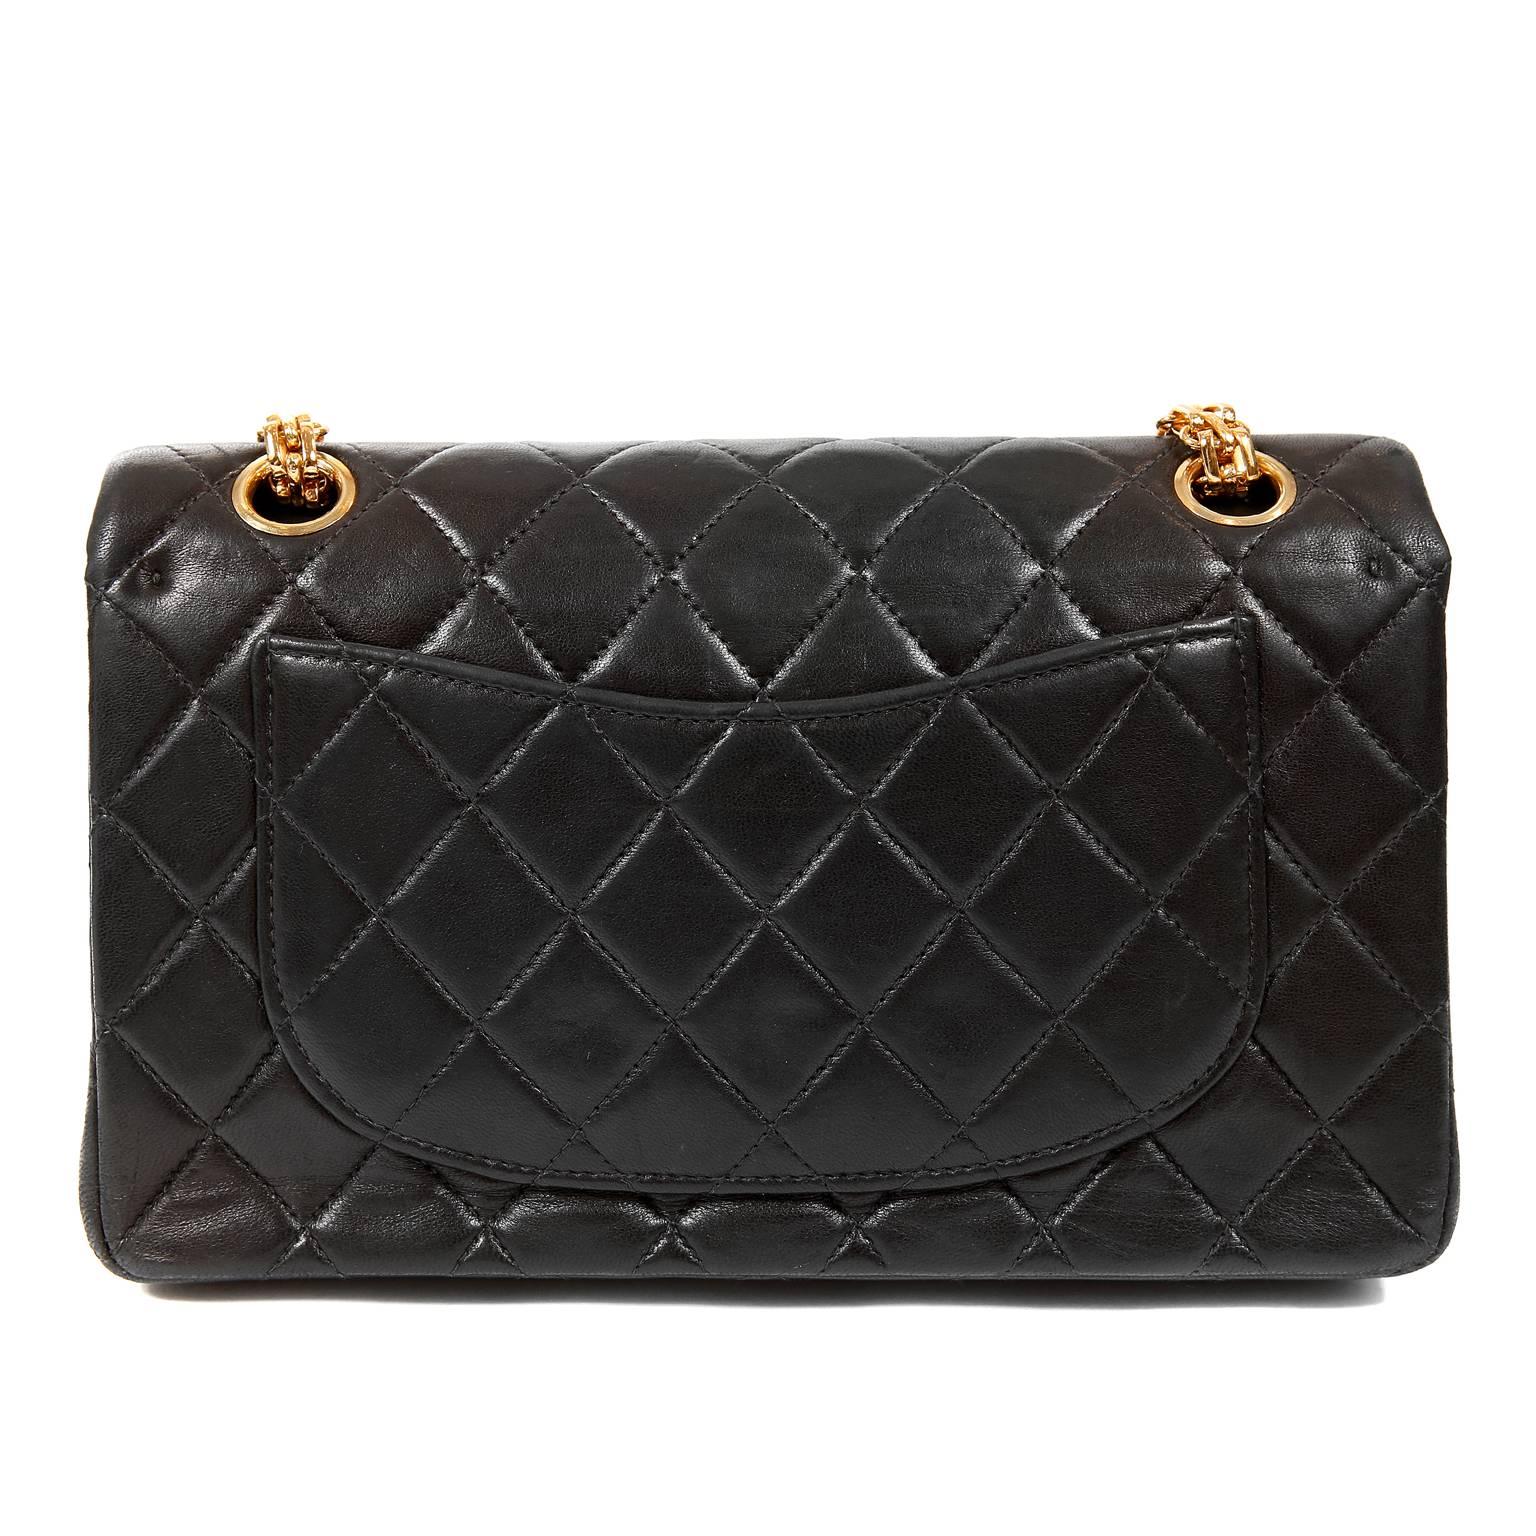 Chanel Black Lambskin 2.55 Medium  Reissue Bag- EXCELLENT PLUS
  24K gold plated hardware accents makes this beautiful piece particularly special.  
Black lambskin is quilted in signature Chanel diamond pattern.  24k gold mademoiselle twist lock on